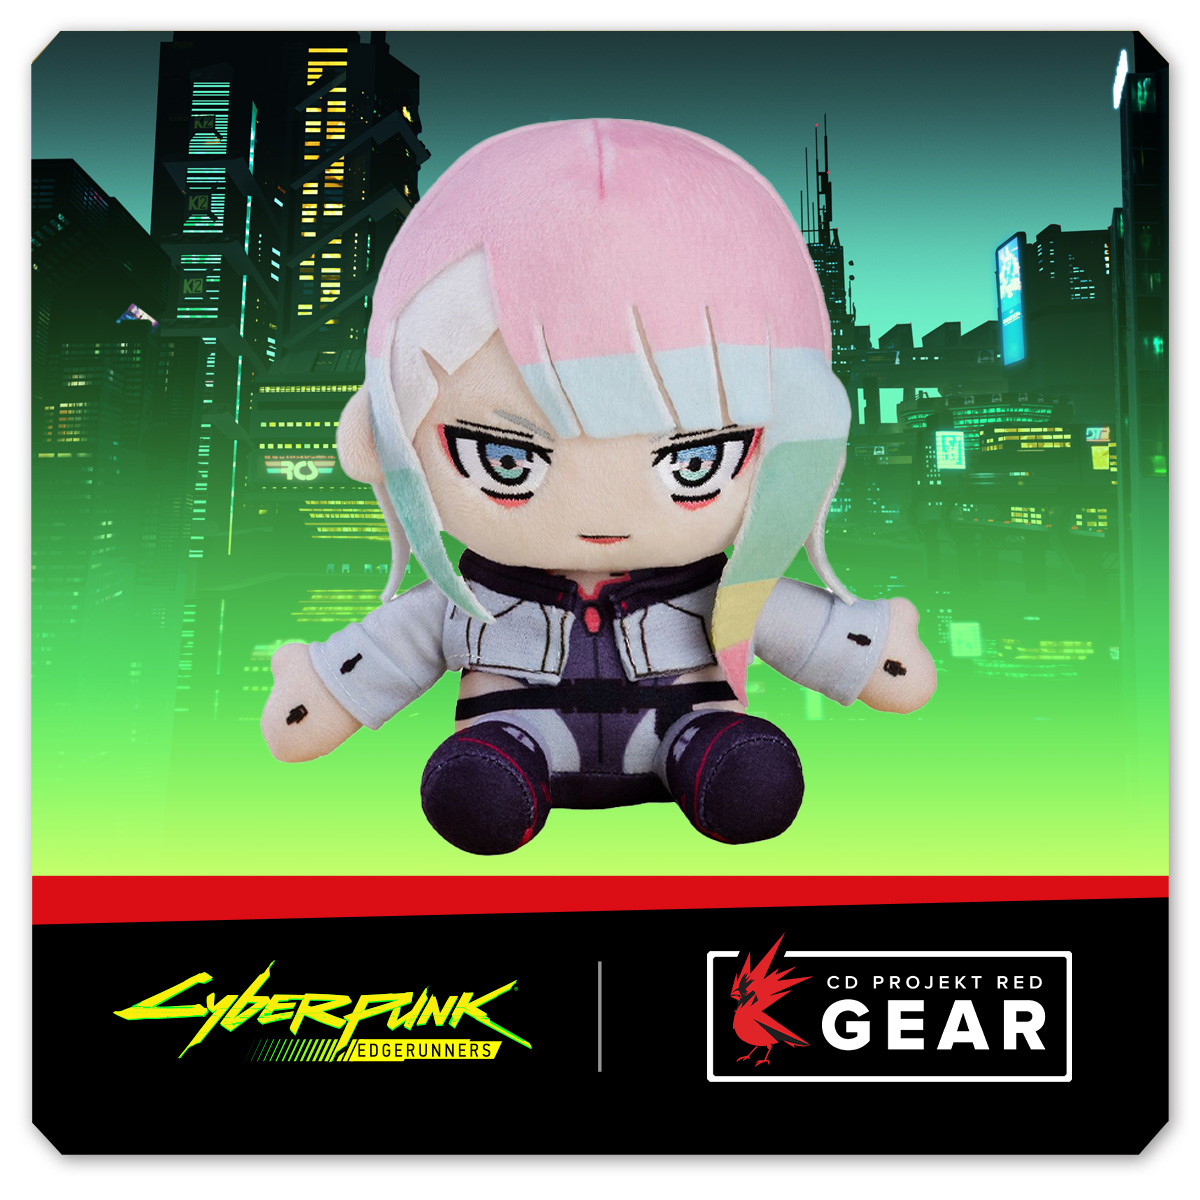 Meet your new partner in crime! This lovable figure brings a plush take on the elite netrunner, Lucy, transporting her from the deadly underworld of the @CyberpunkGame @Edgerunners anime and implanting her right into your heart! gear.cdprojektred.com/products/cyber…